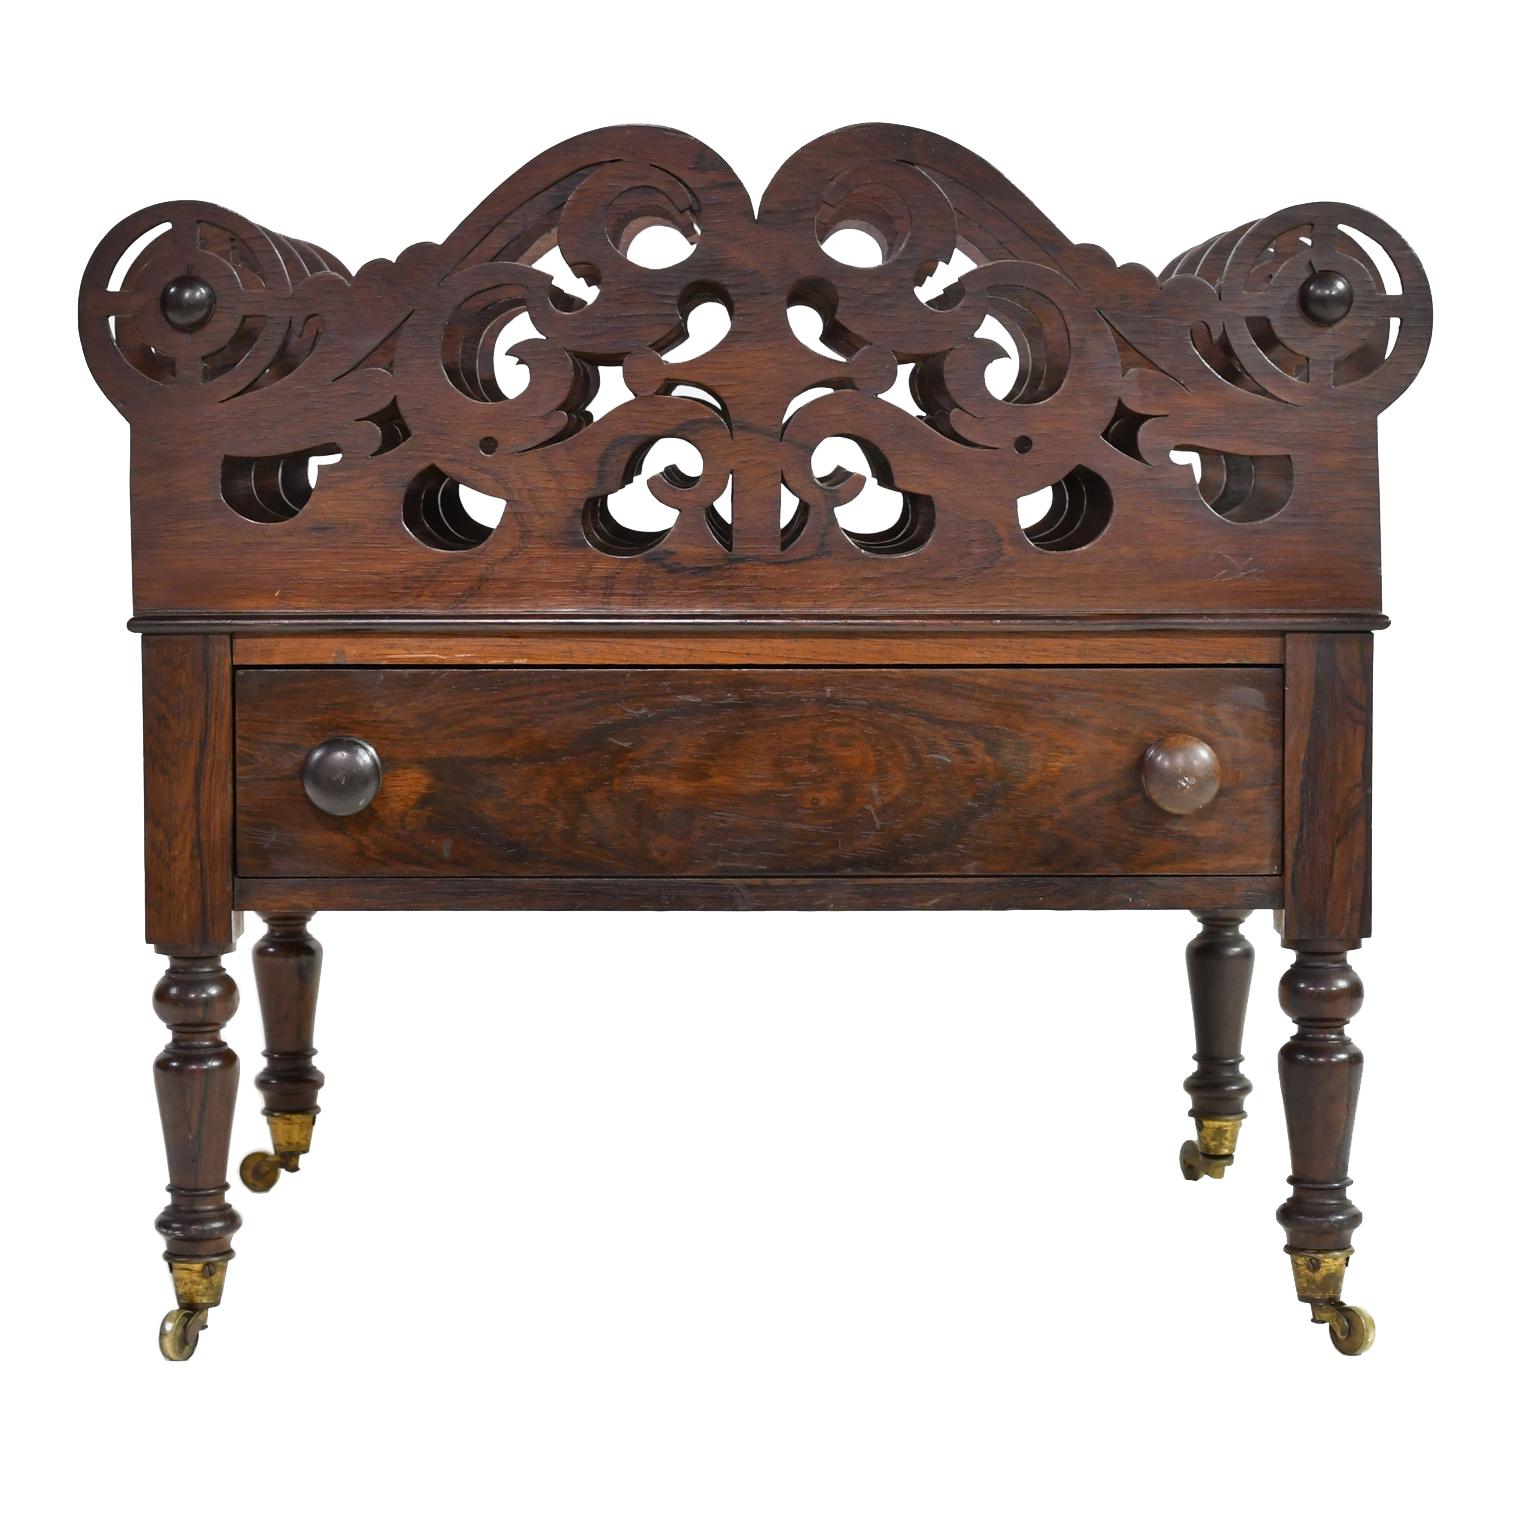 An exquisite English sheet music rack or Canterbury in prized rosewood with four fretwork partitions, one drawer, and resting on turned legs mounted on brass casters. England, circa 1830. Offers original turned and threaded pulls which are also made